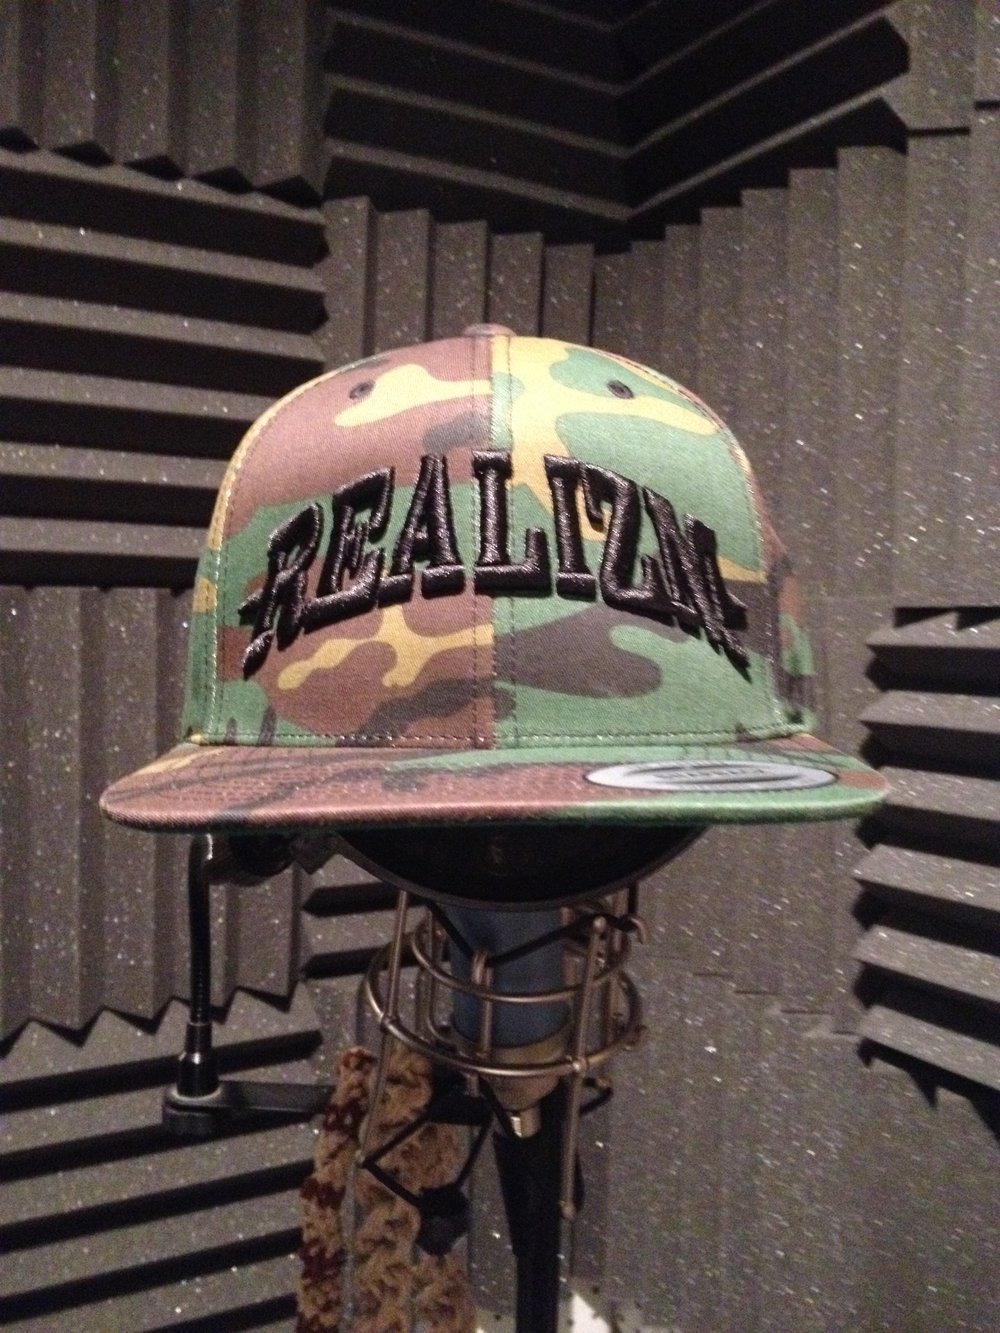 Realizm Snapback Hats! (4 Different Colors)